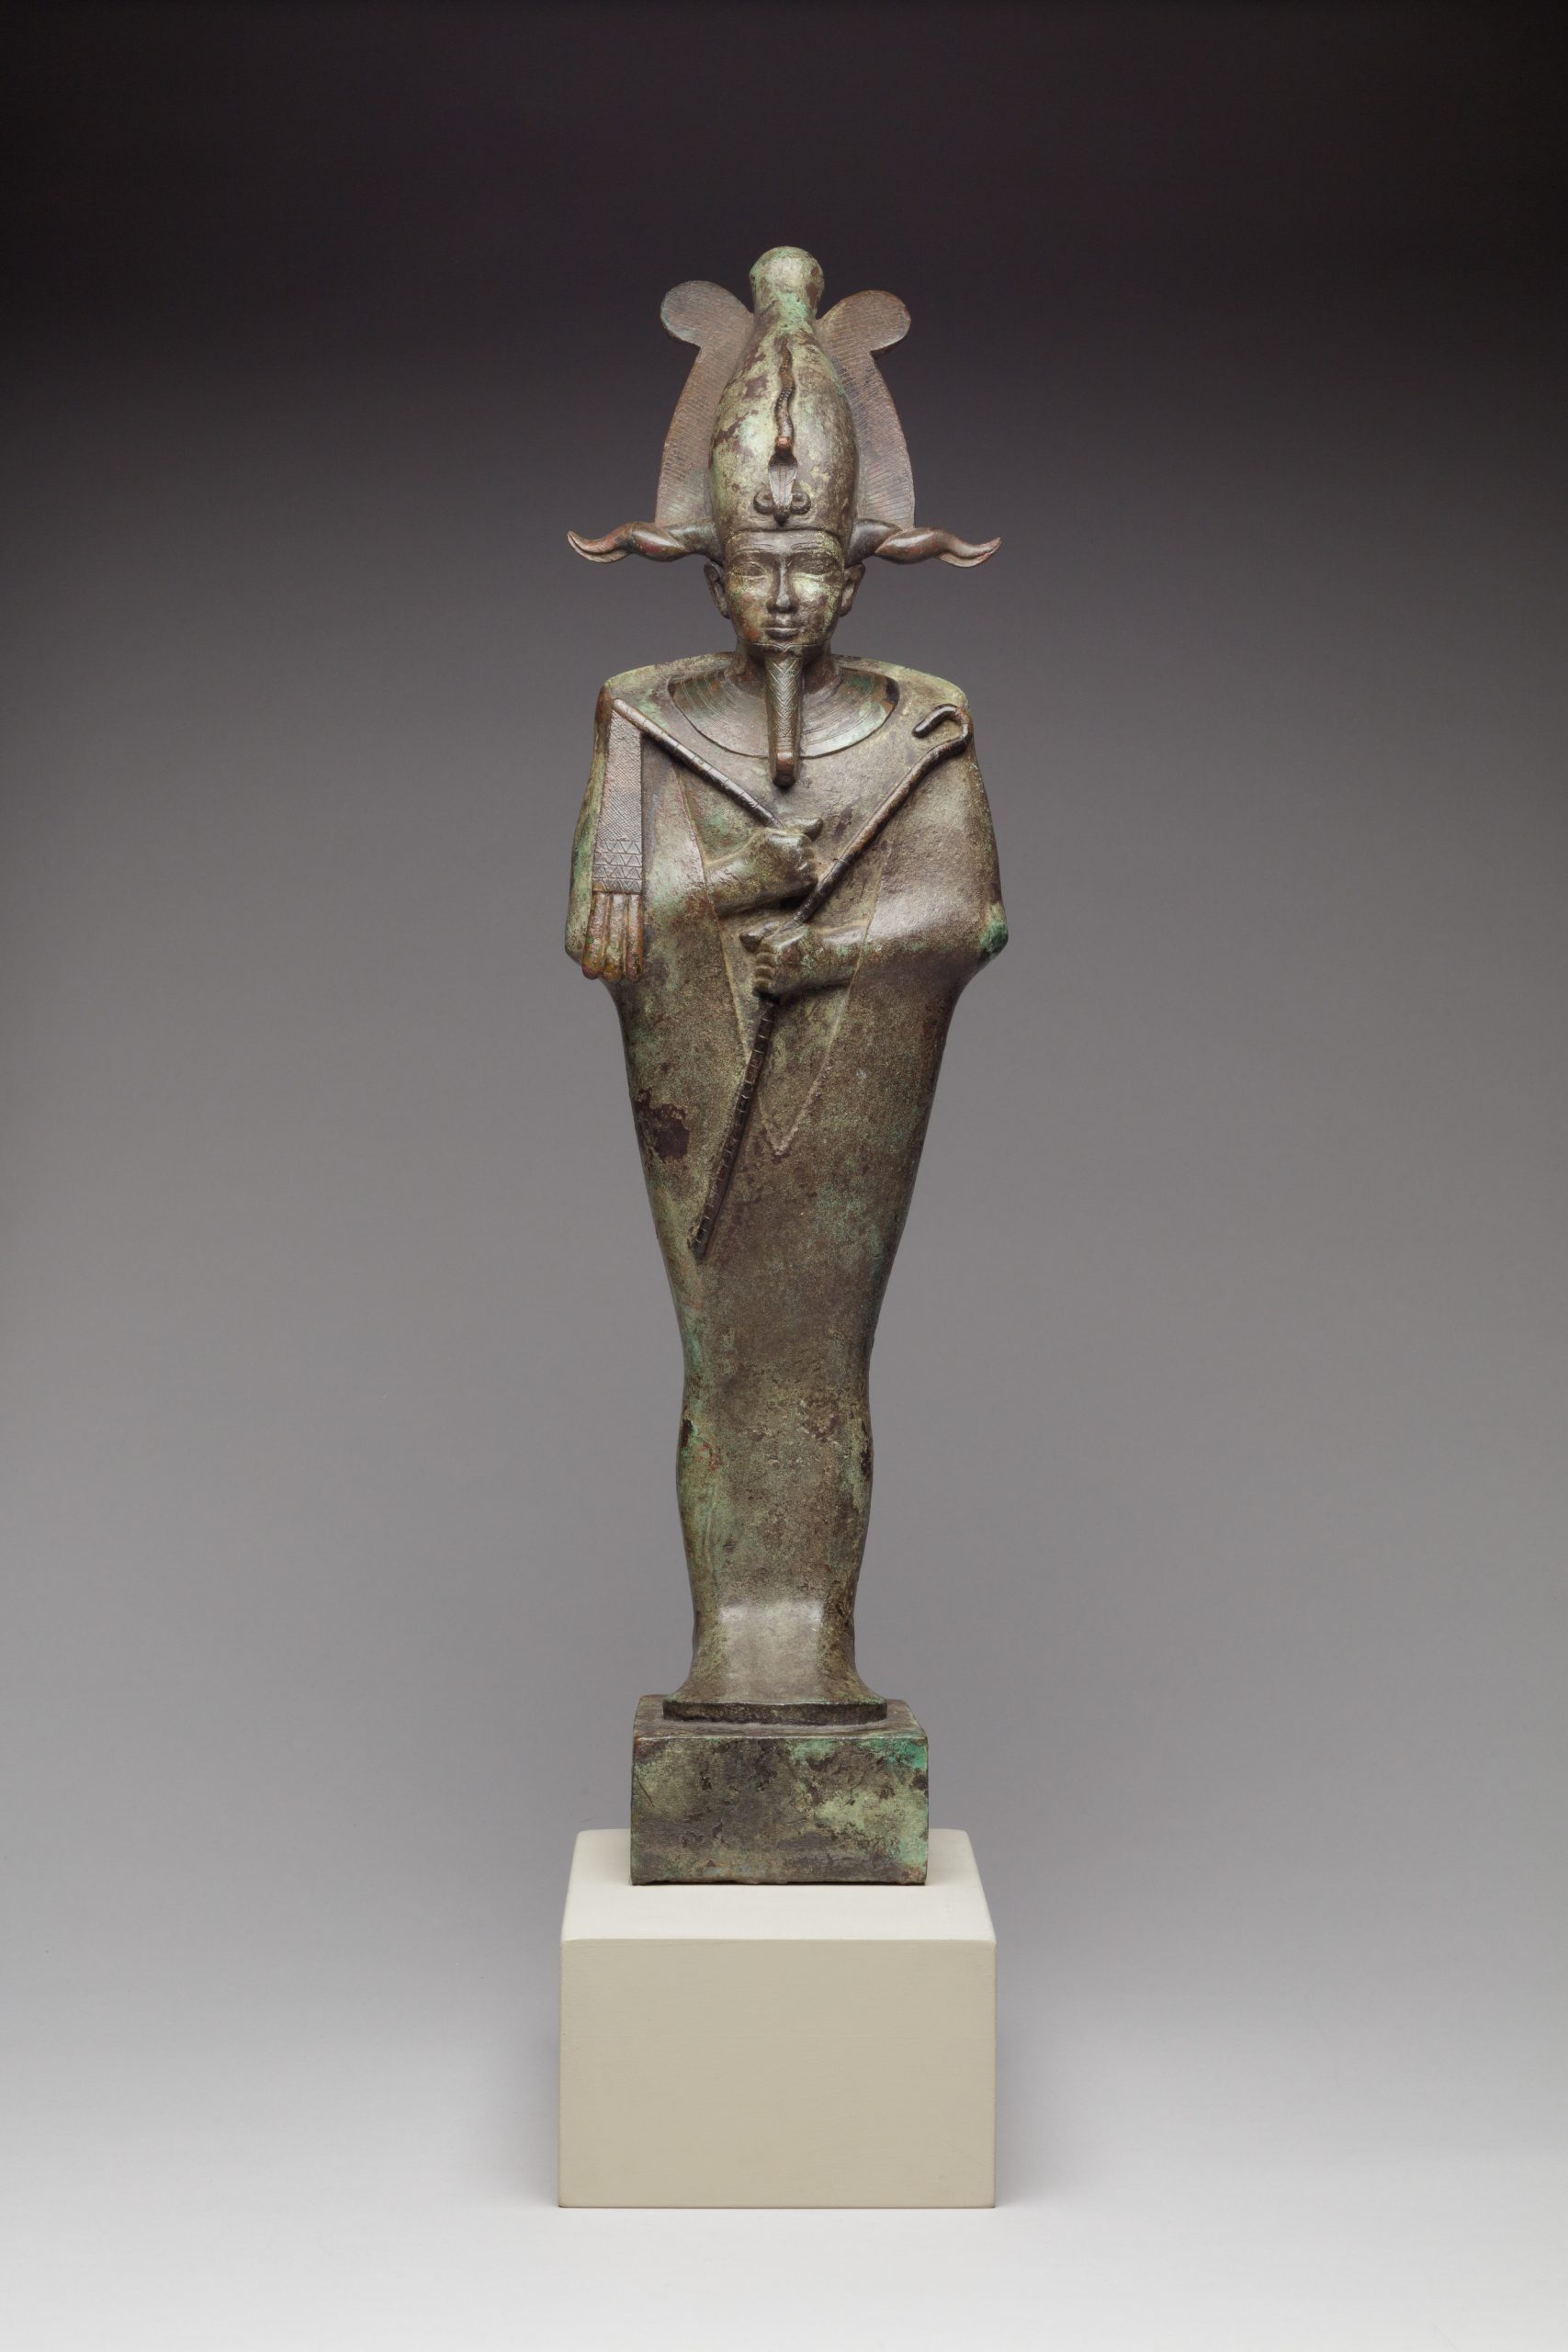 This Egyptian statuette of Osiris dated from 664–332 B.C. from the late period, specifically the Dynasty 26–30. The Osiris statuette stands at the dimensions H. 45.7 × W. 13 × D. 10 cm, 9.2 kg (18 × 5 1/8 × 3 15/16 in., 20.2 lb.); Base: 8 × 8.5 cm (3 1/8 × 3 3/8 in.) and is constructed from the medium of leaded bronze.